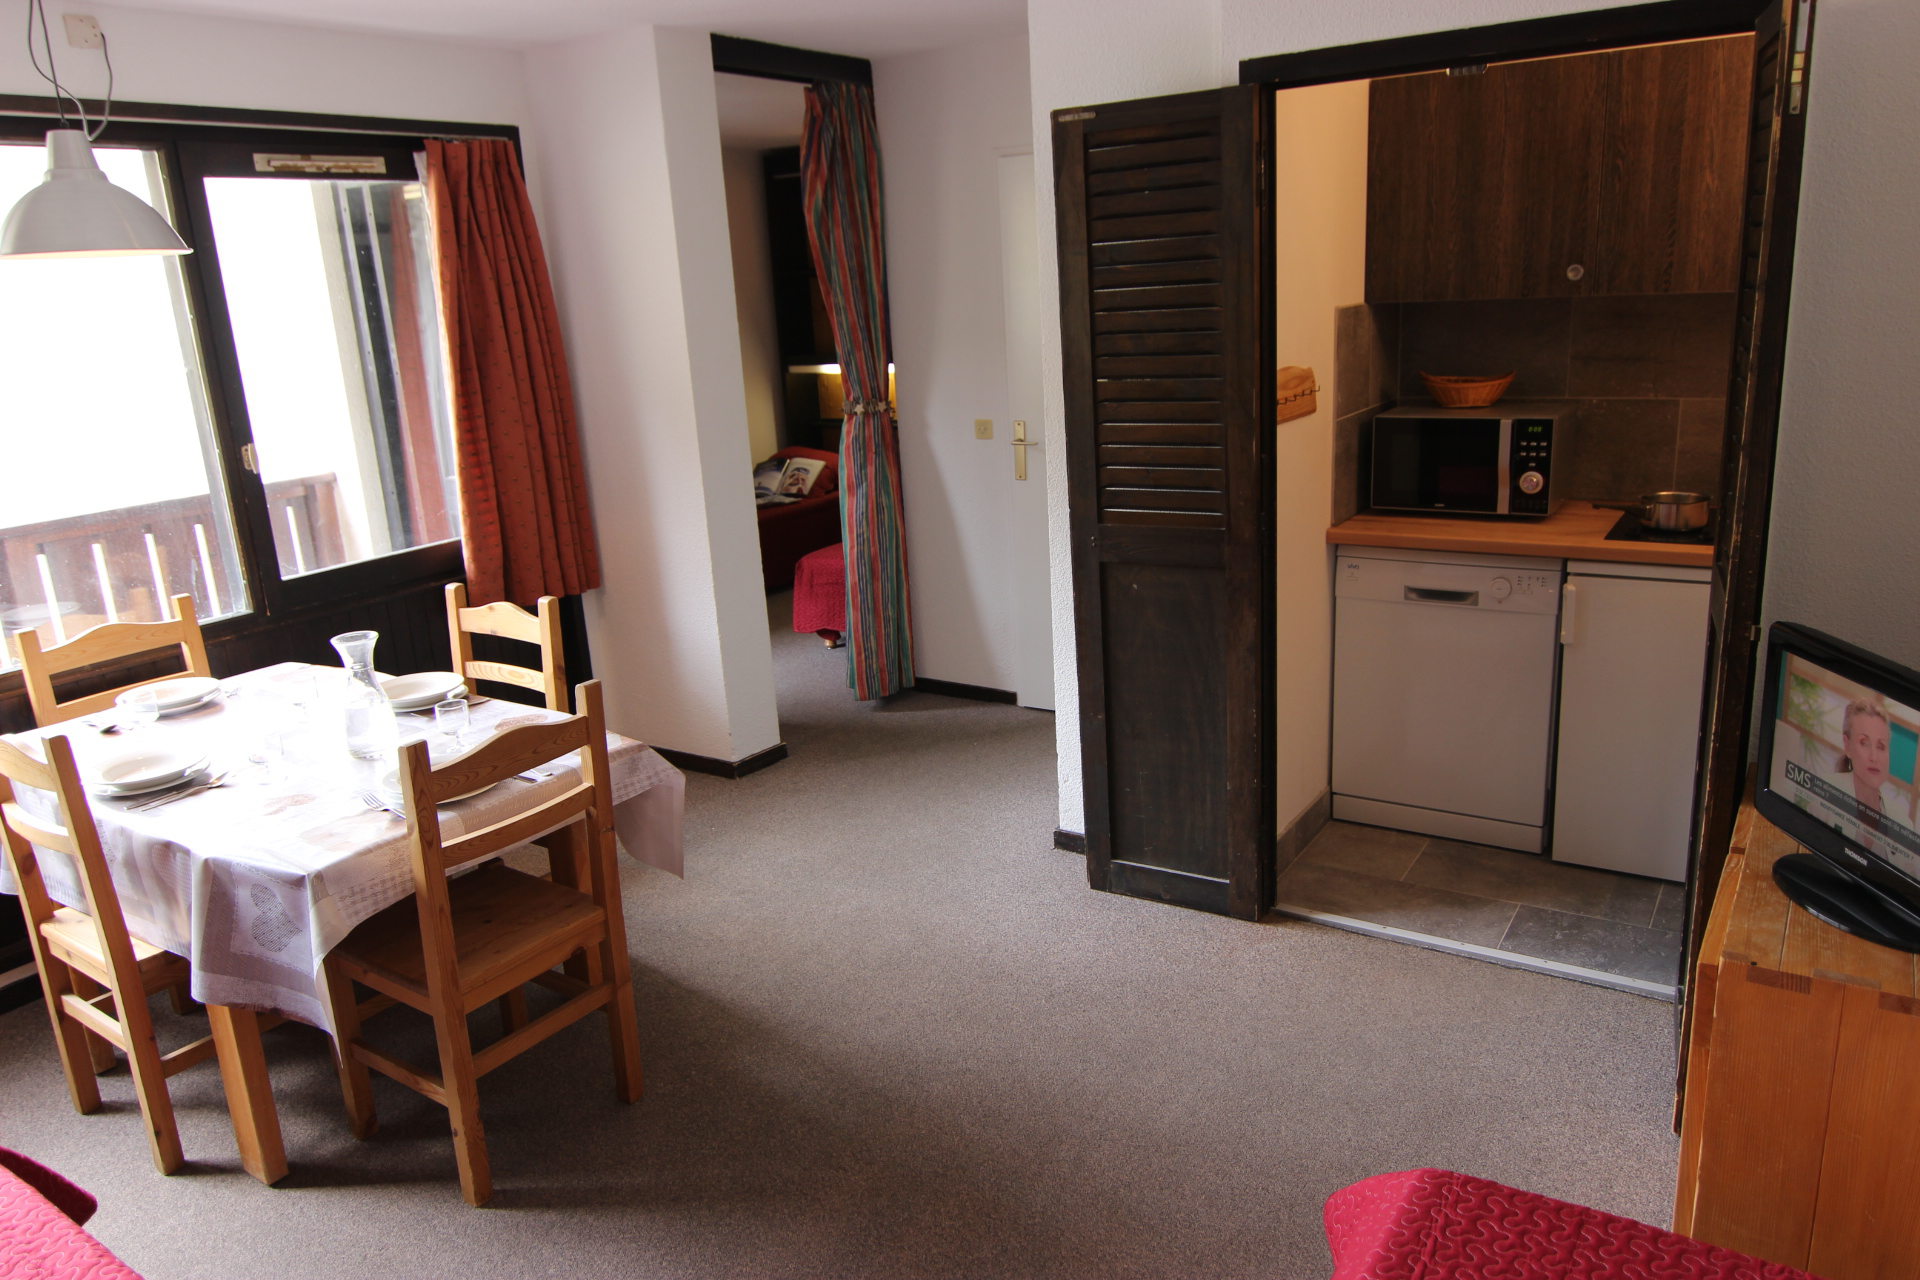 2 rooms 4 people - Apartements OLYMPIC - Val Thorens